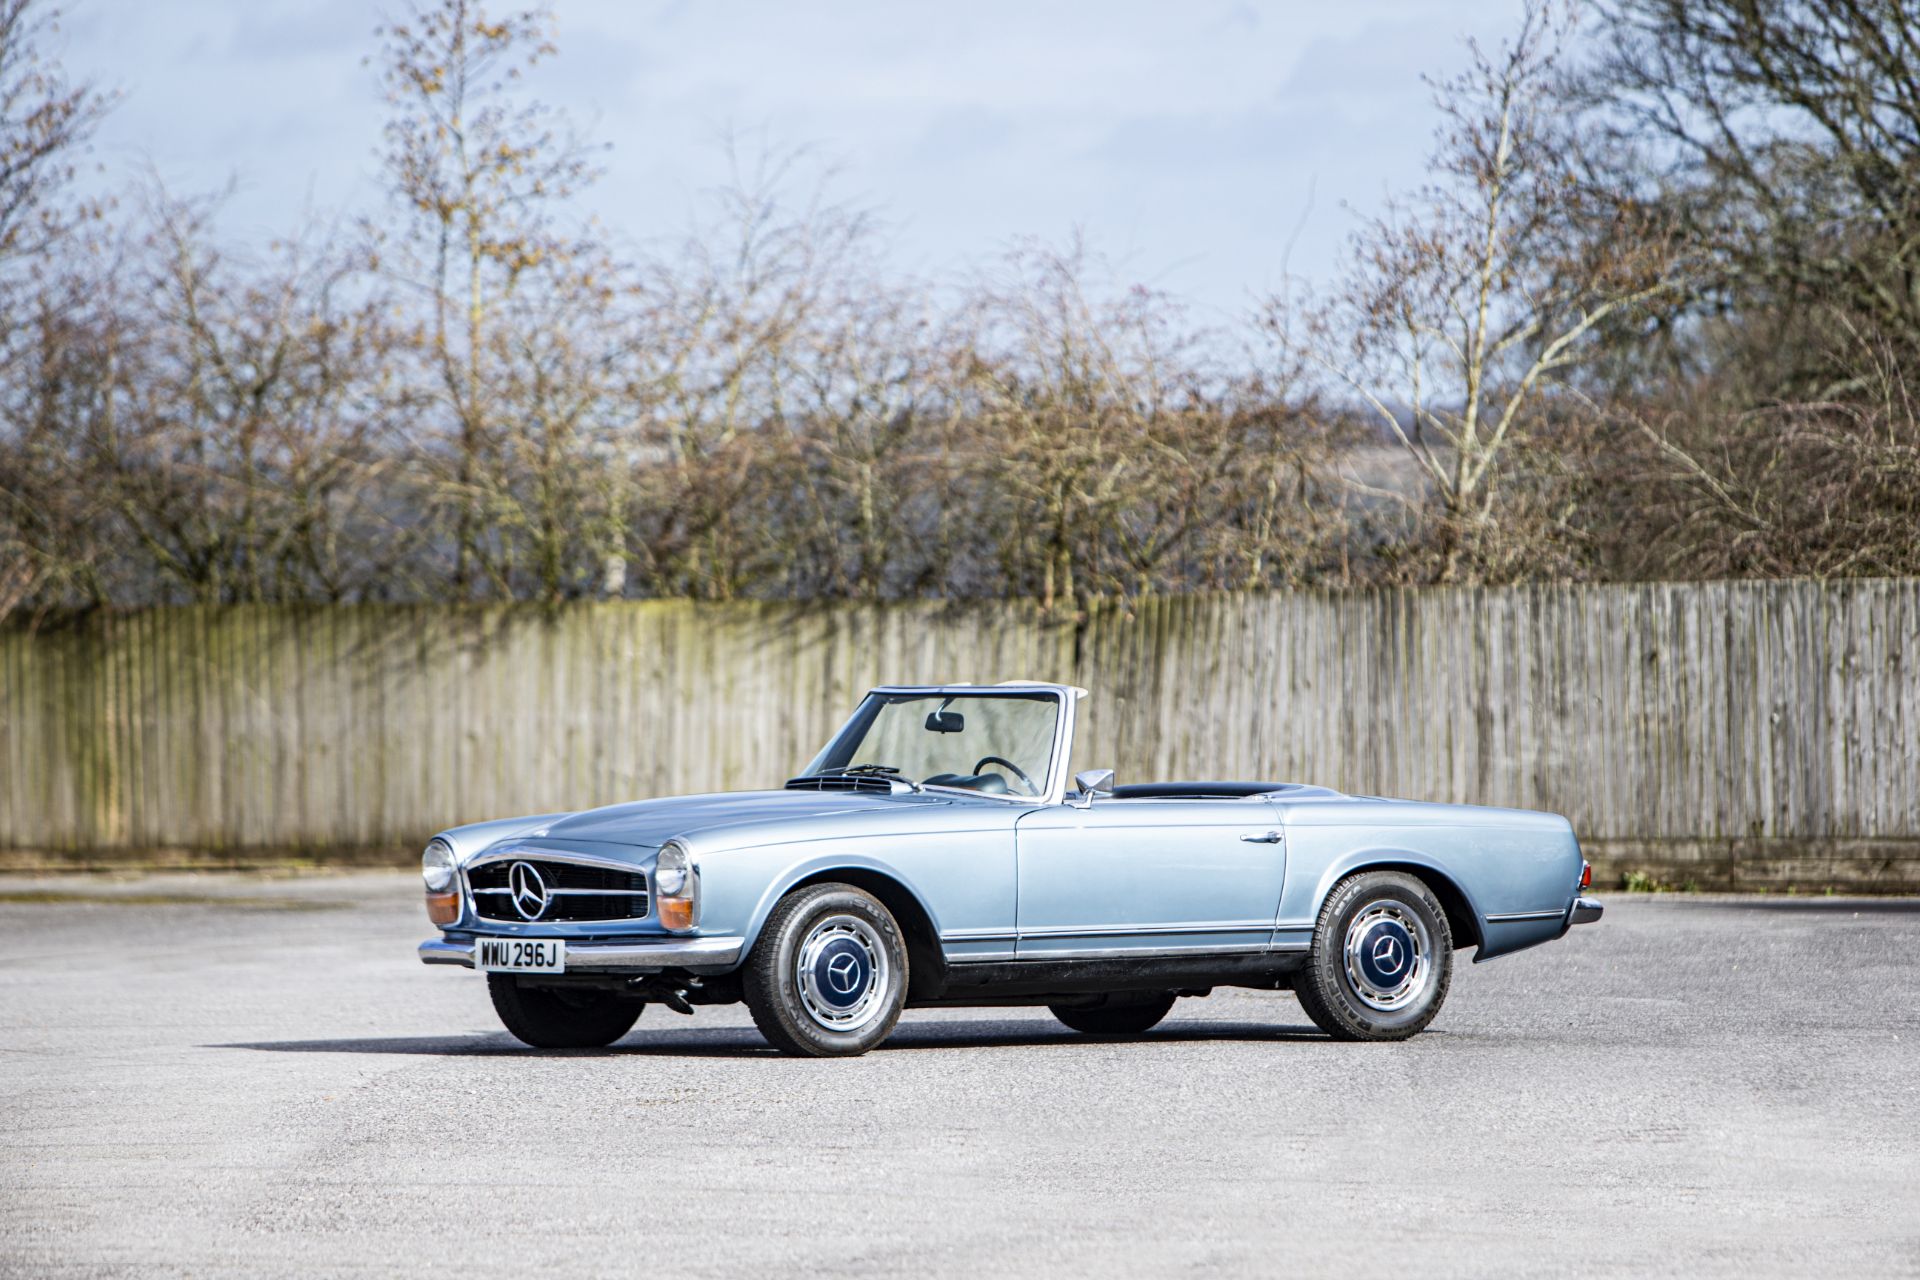 1970 Mercedes-Benz 280SL Convertible with Hardtop Chassis no. 022648